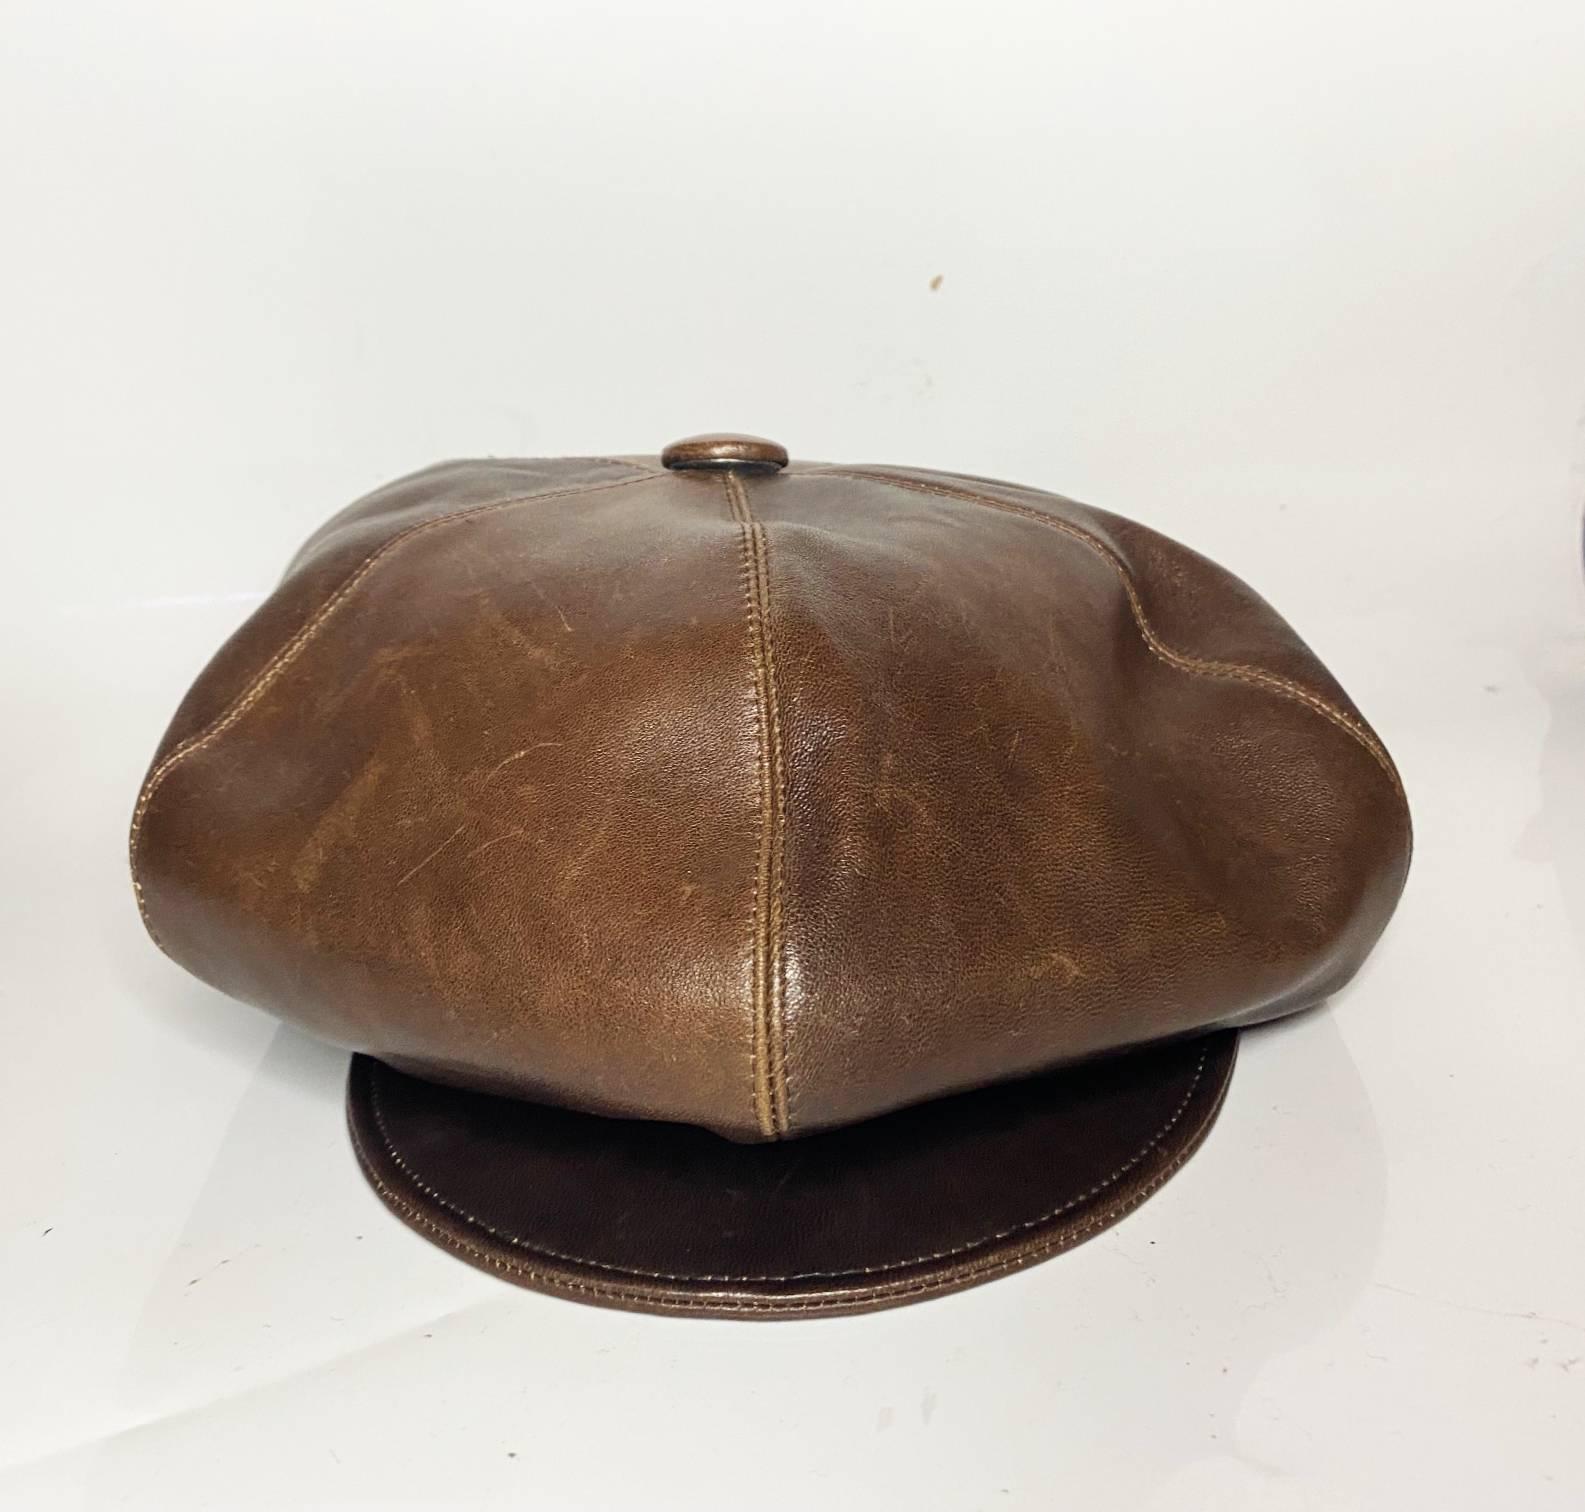 Christian Dior flap cap, brown leather, newsboy cap design, brass button detail on side, black logo lining, Made in France 

Condition: 2000s, very good, minimal sign of wear, barely visible
Size: M
Measurements:
Outside diameter: 28cm 